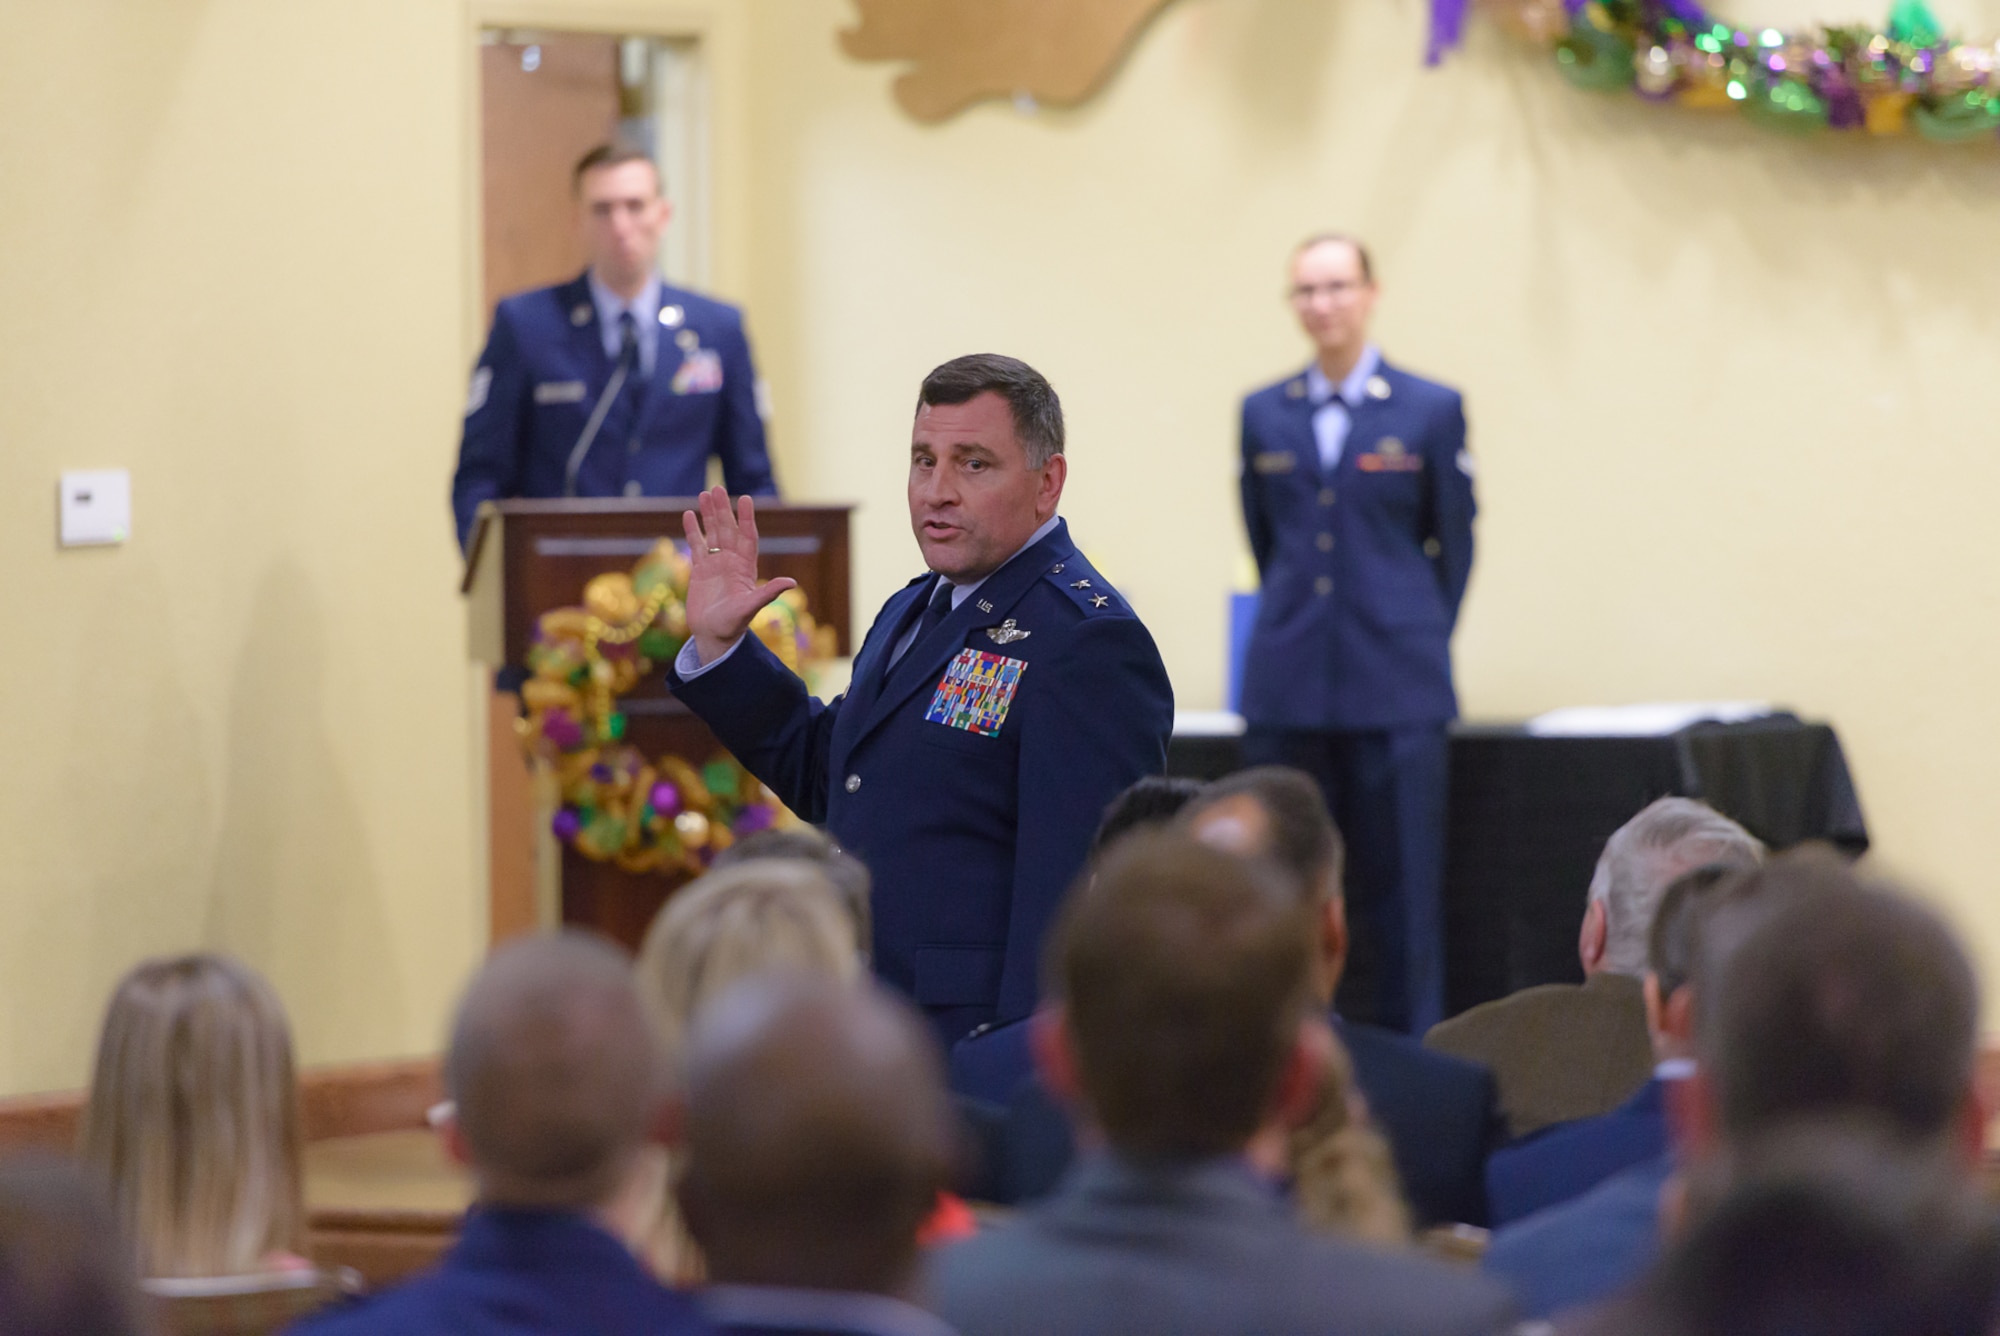 Maj. Gen. Timothy Leahy, 2nd Air Force commander, delivers the opening remarks to the honorary commanders and Keesler leadership during the 2018 Honorary Commanders Induction Ceremony at the Bay Breeze Event Center Jan. 26, 2018, on Keesler Air Force Base, Mississippi. The event recognized the newest members of Keesler’s honorary commanders program, which is a partnership between base leadership and local civic leaders to promote strong ties between military and civilian leaders. (U.S. Air Force photo by André Askew)